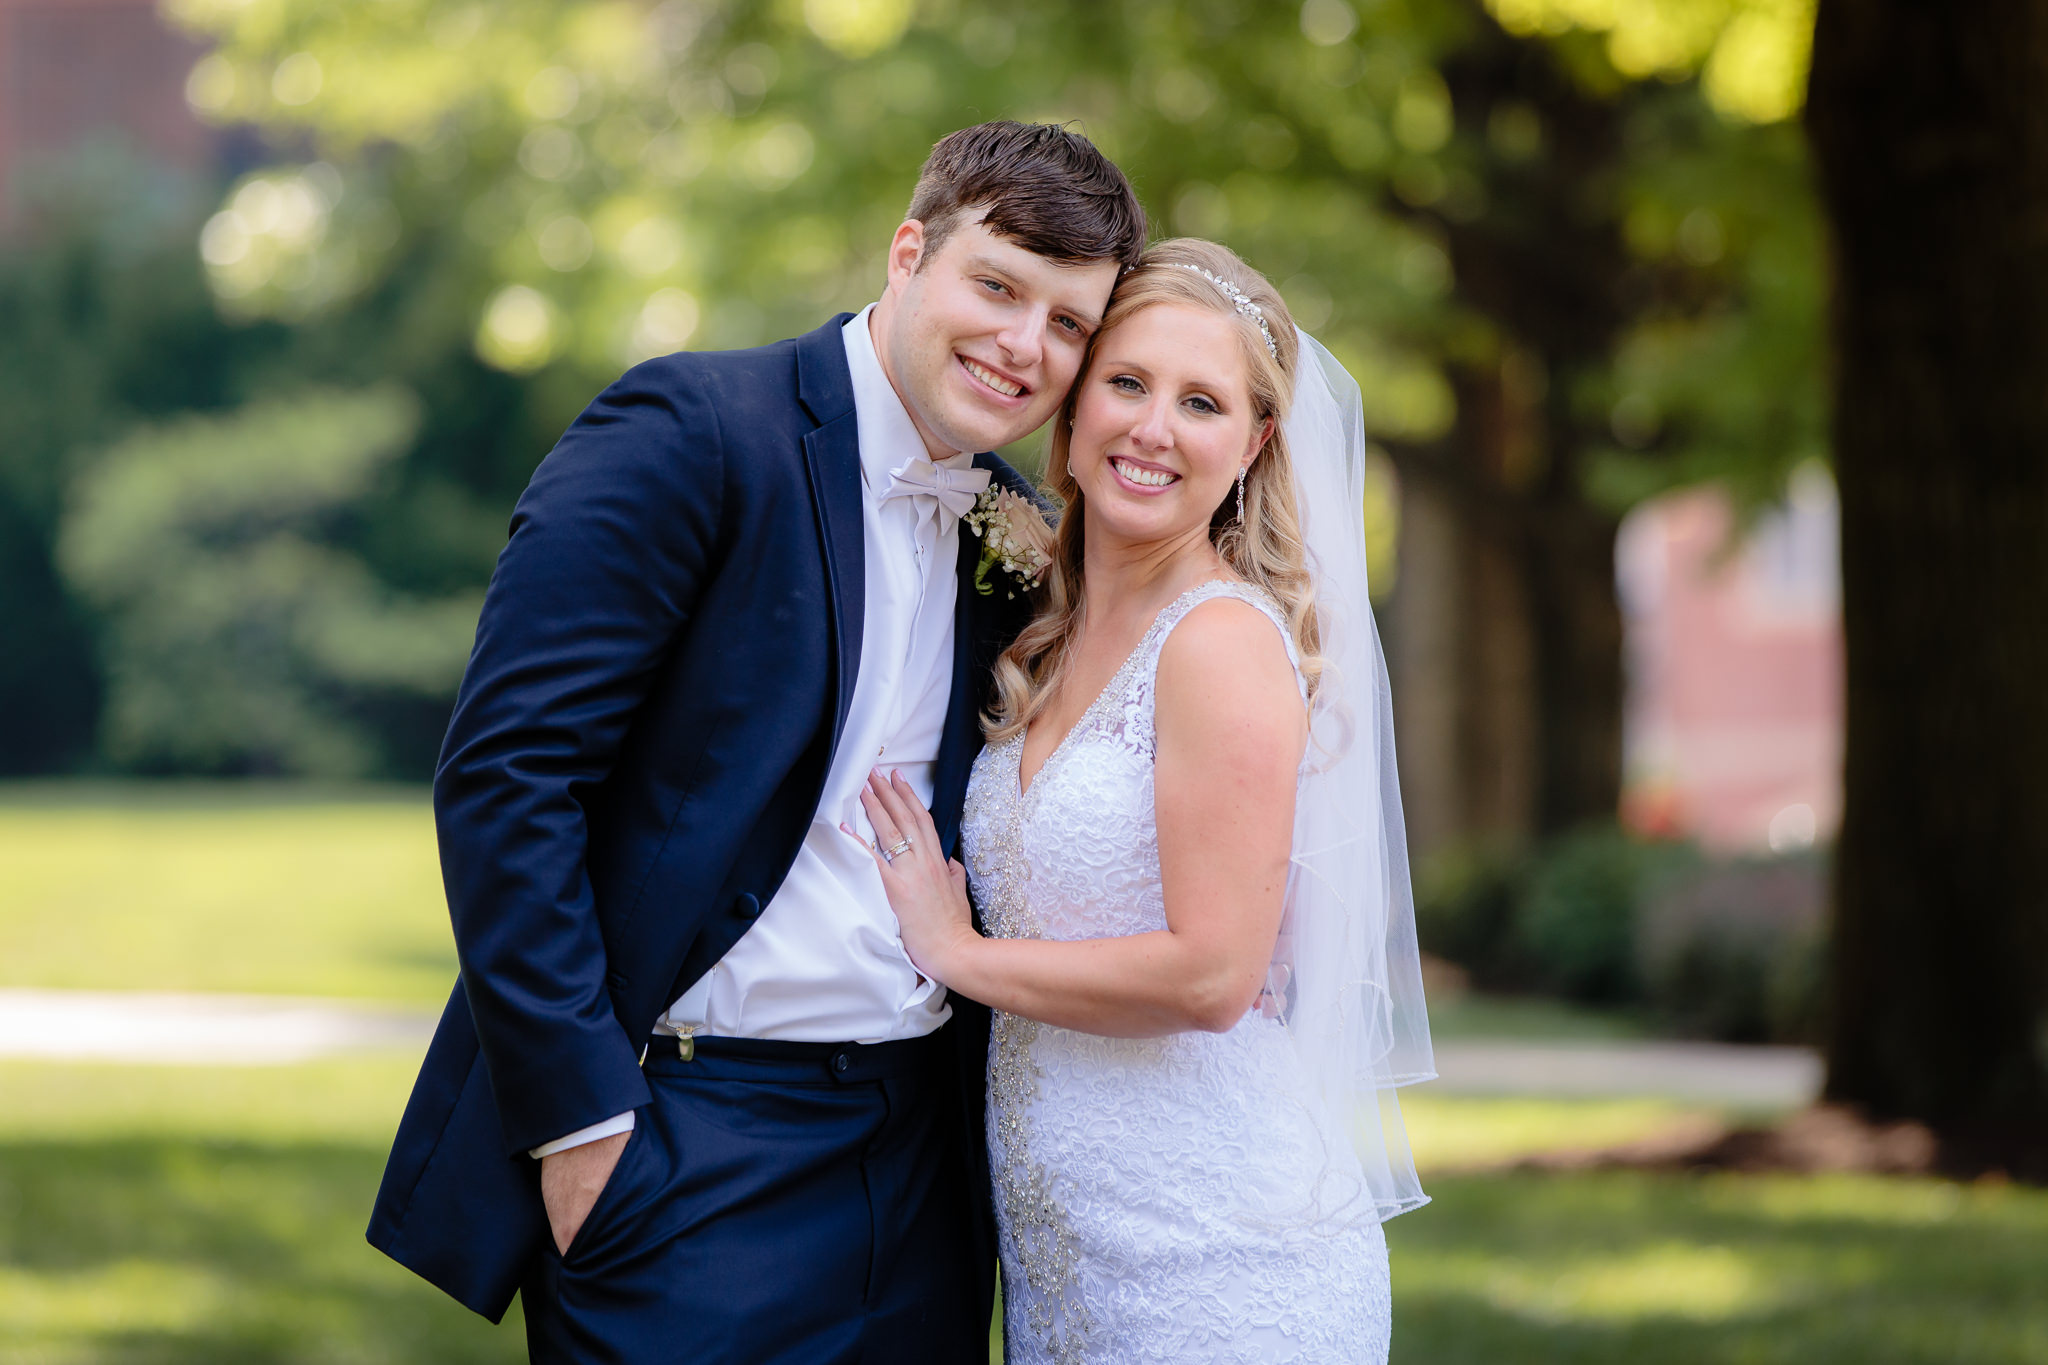 Bride & groom pose for portraits at their wedding at Duquesne University